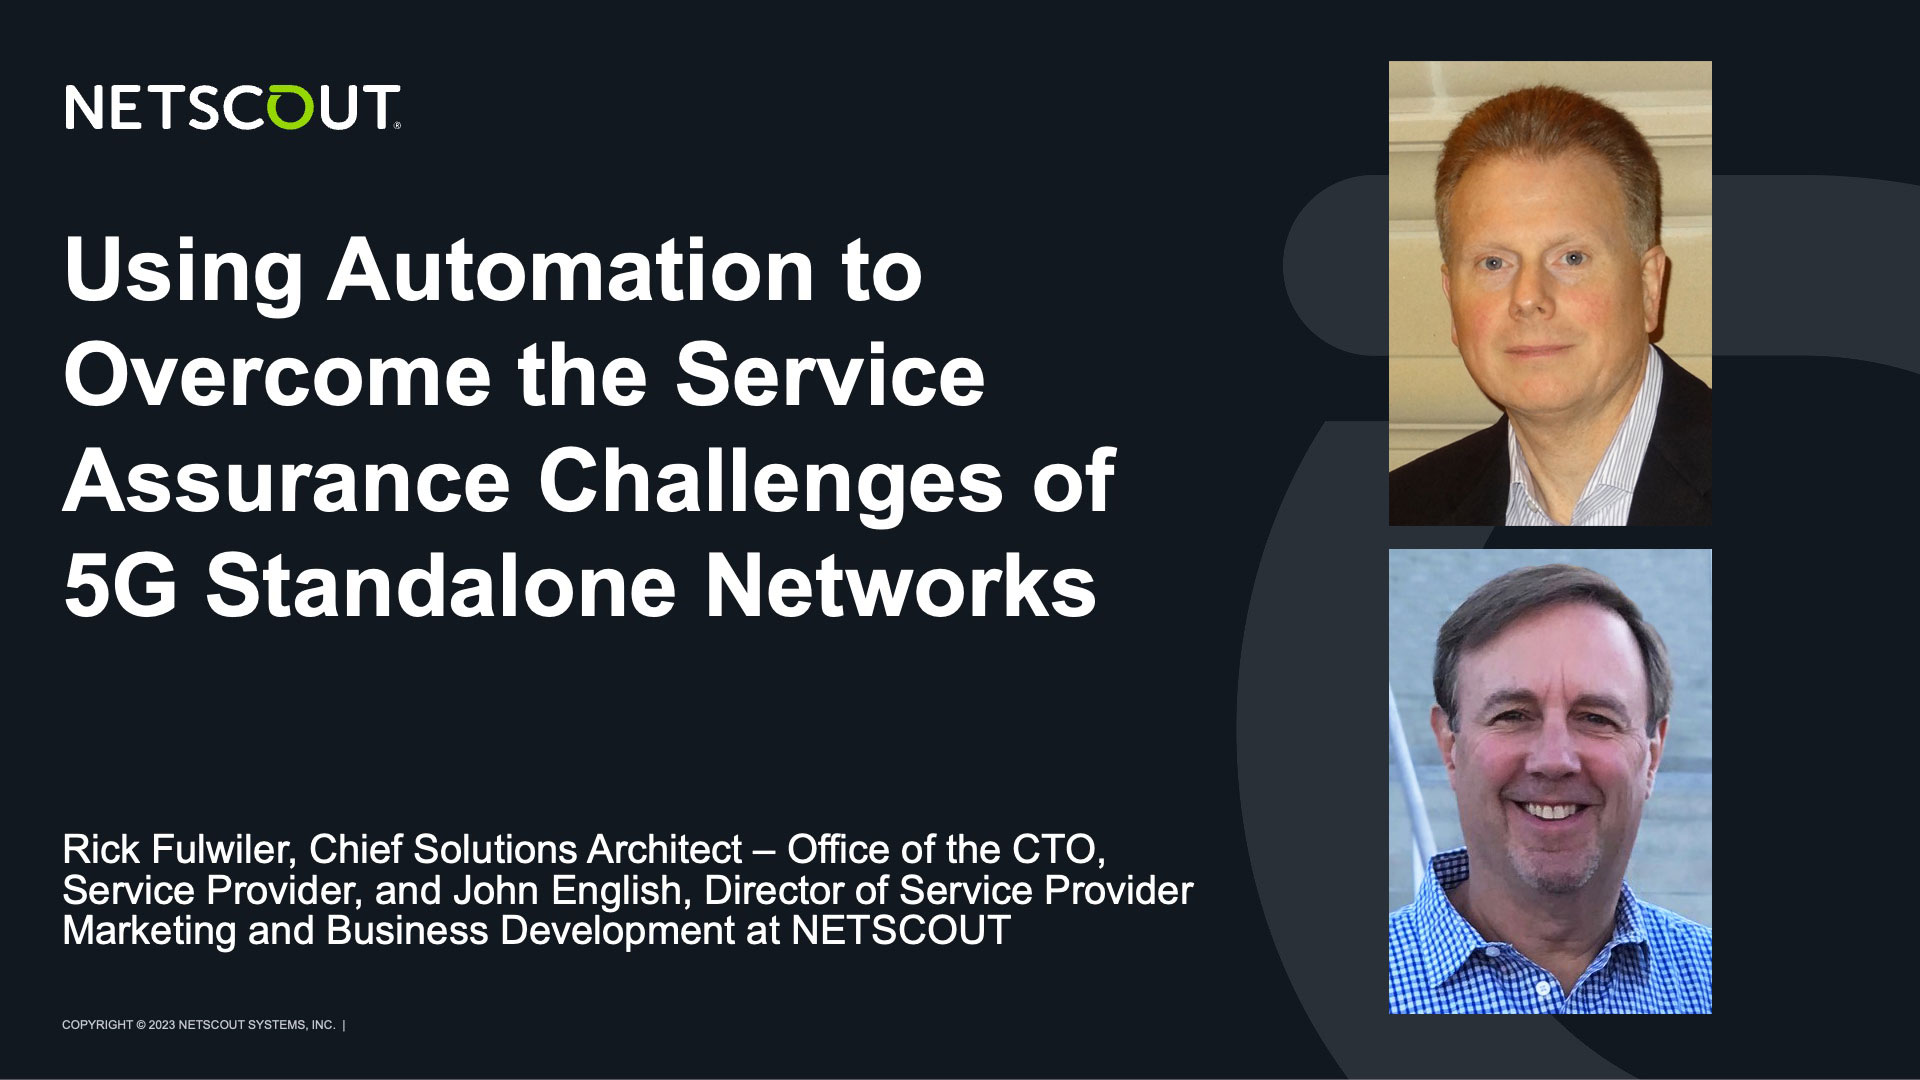 Using Automation to Overcome the Service Assurance Challenges of 5G Standalone Networks